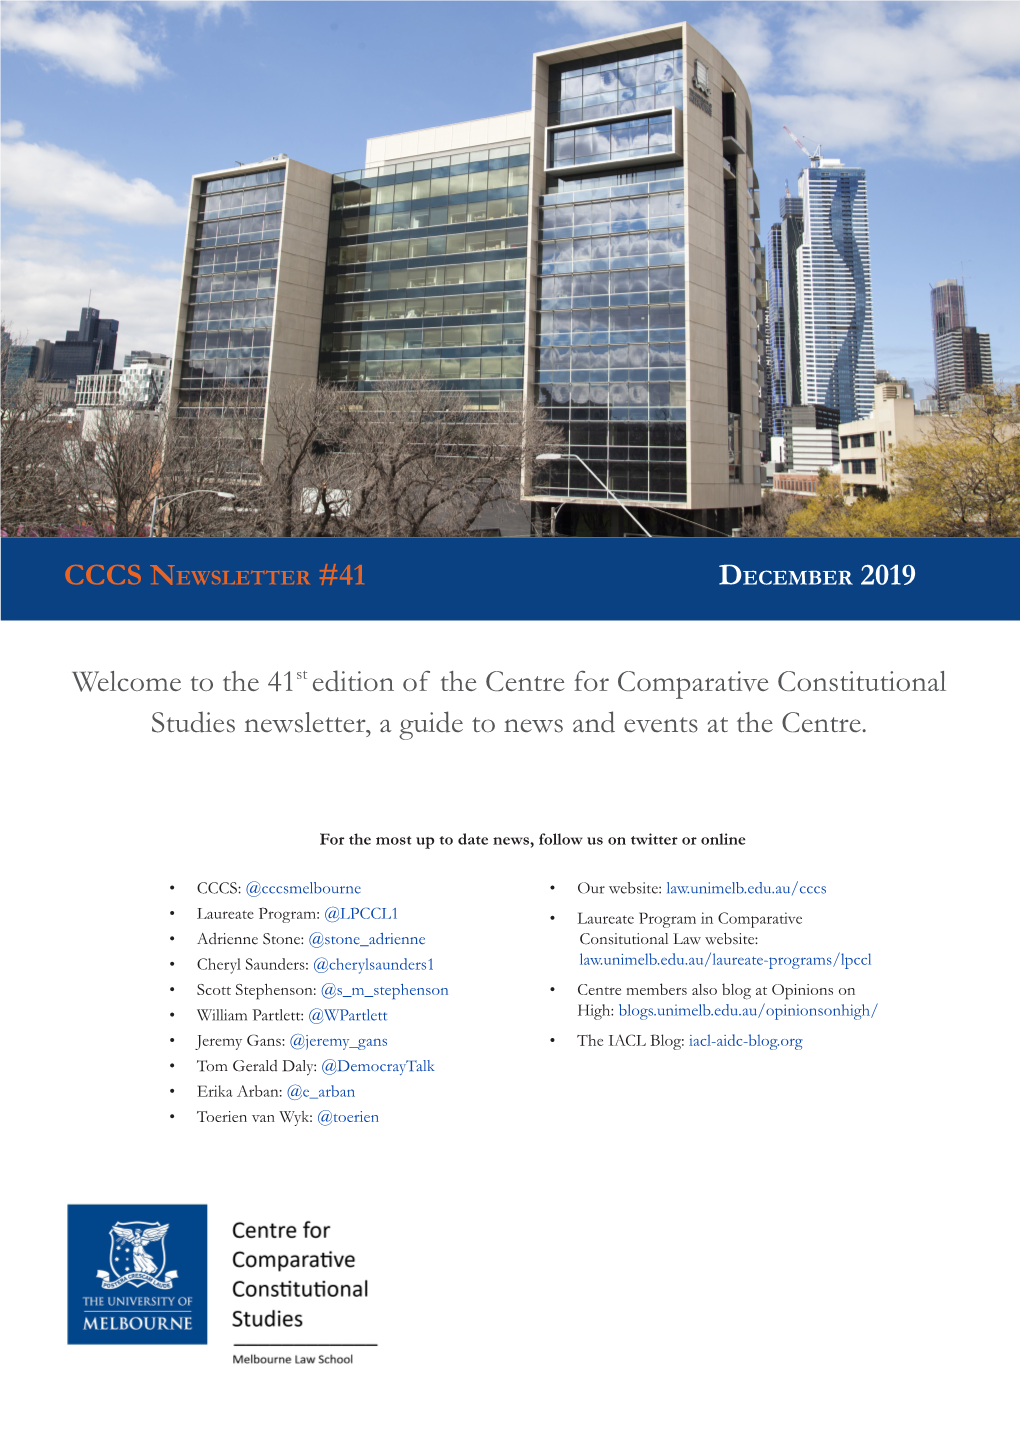 The 41St Edition of the Centre for Comparative Constitutional Studies Newsletter, a Guide to News and Events at the Centre